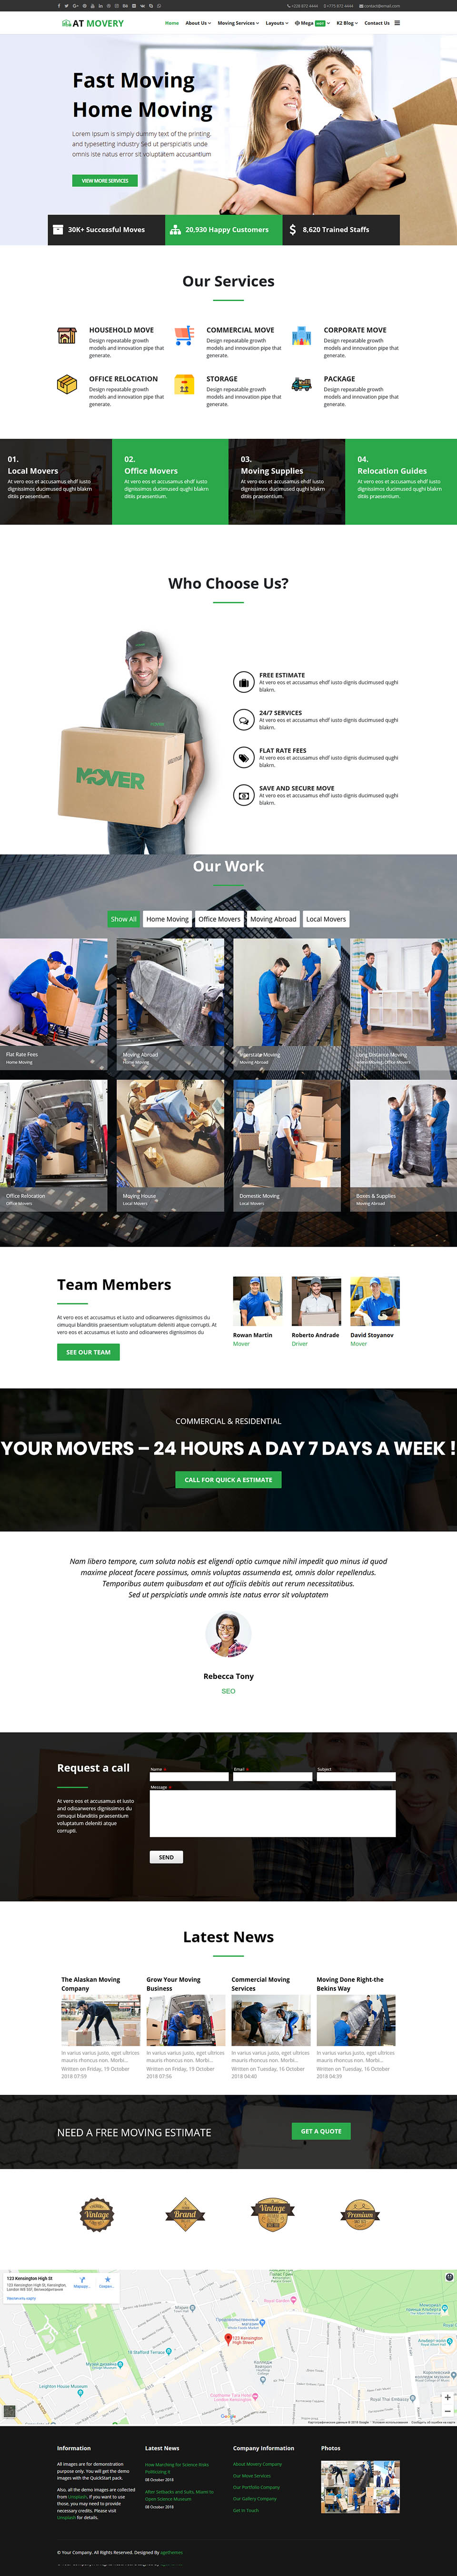 Joomla template AGE Themes Movery